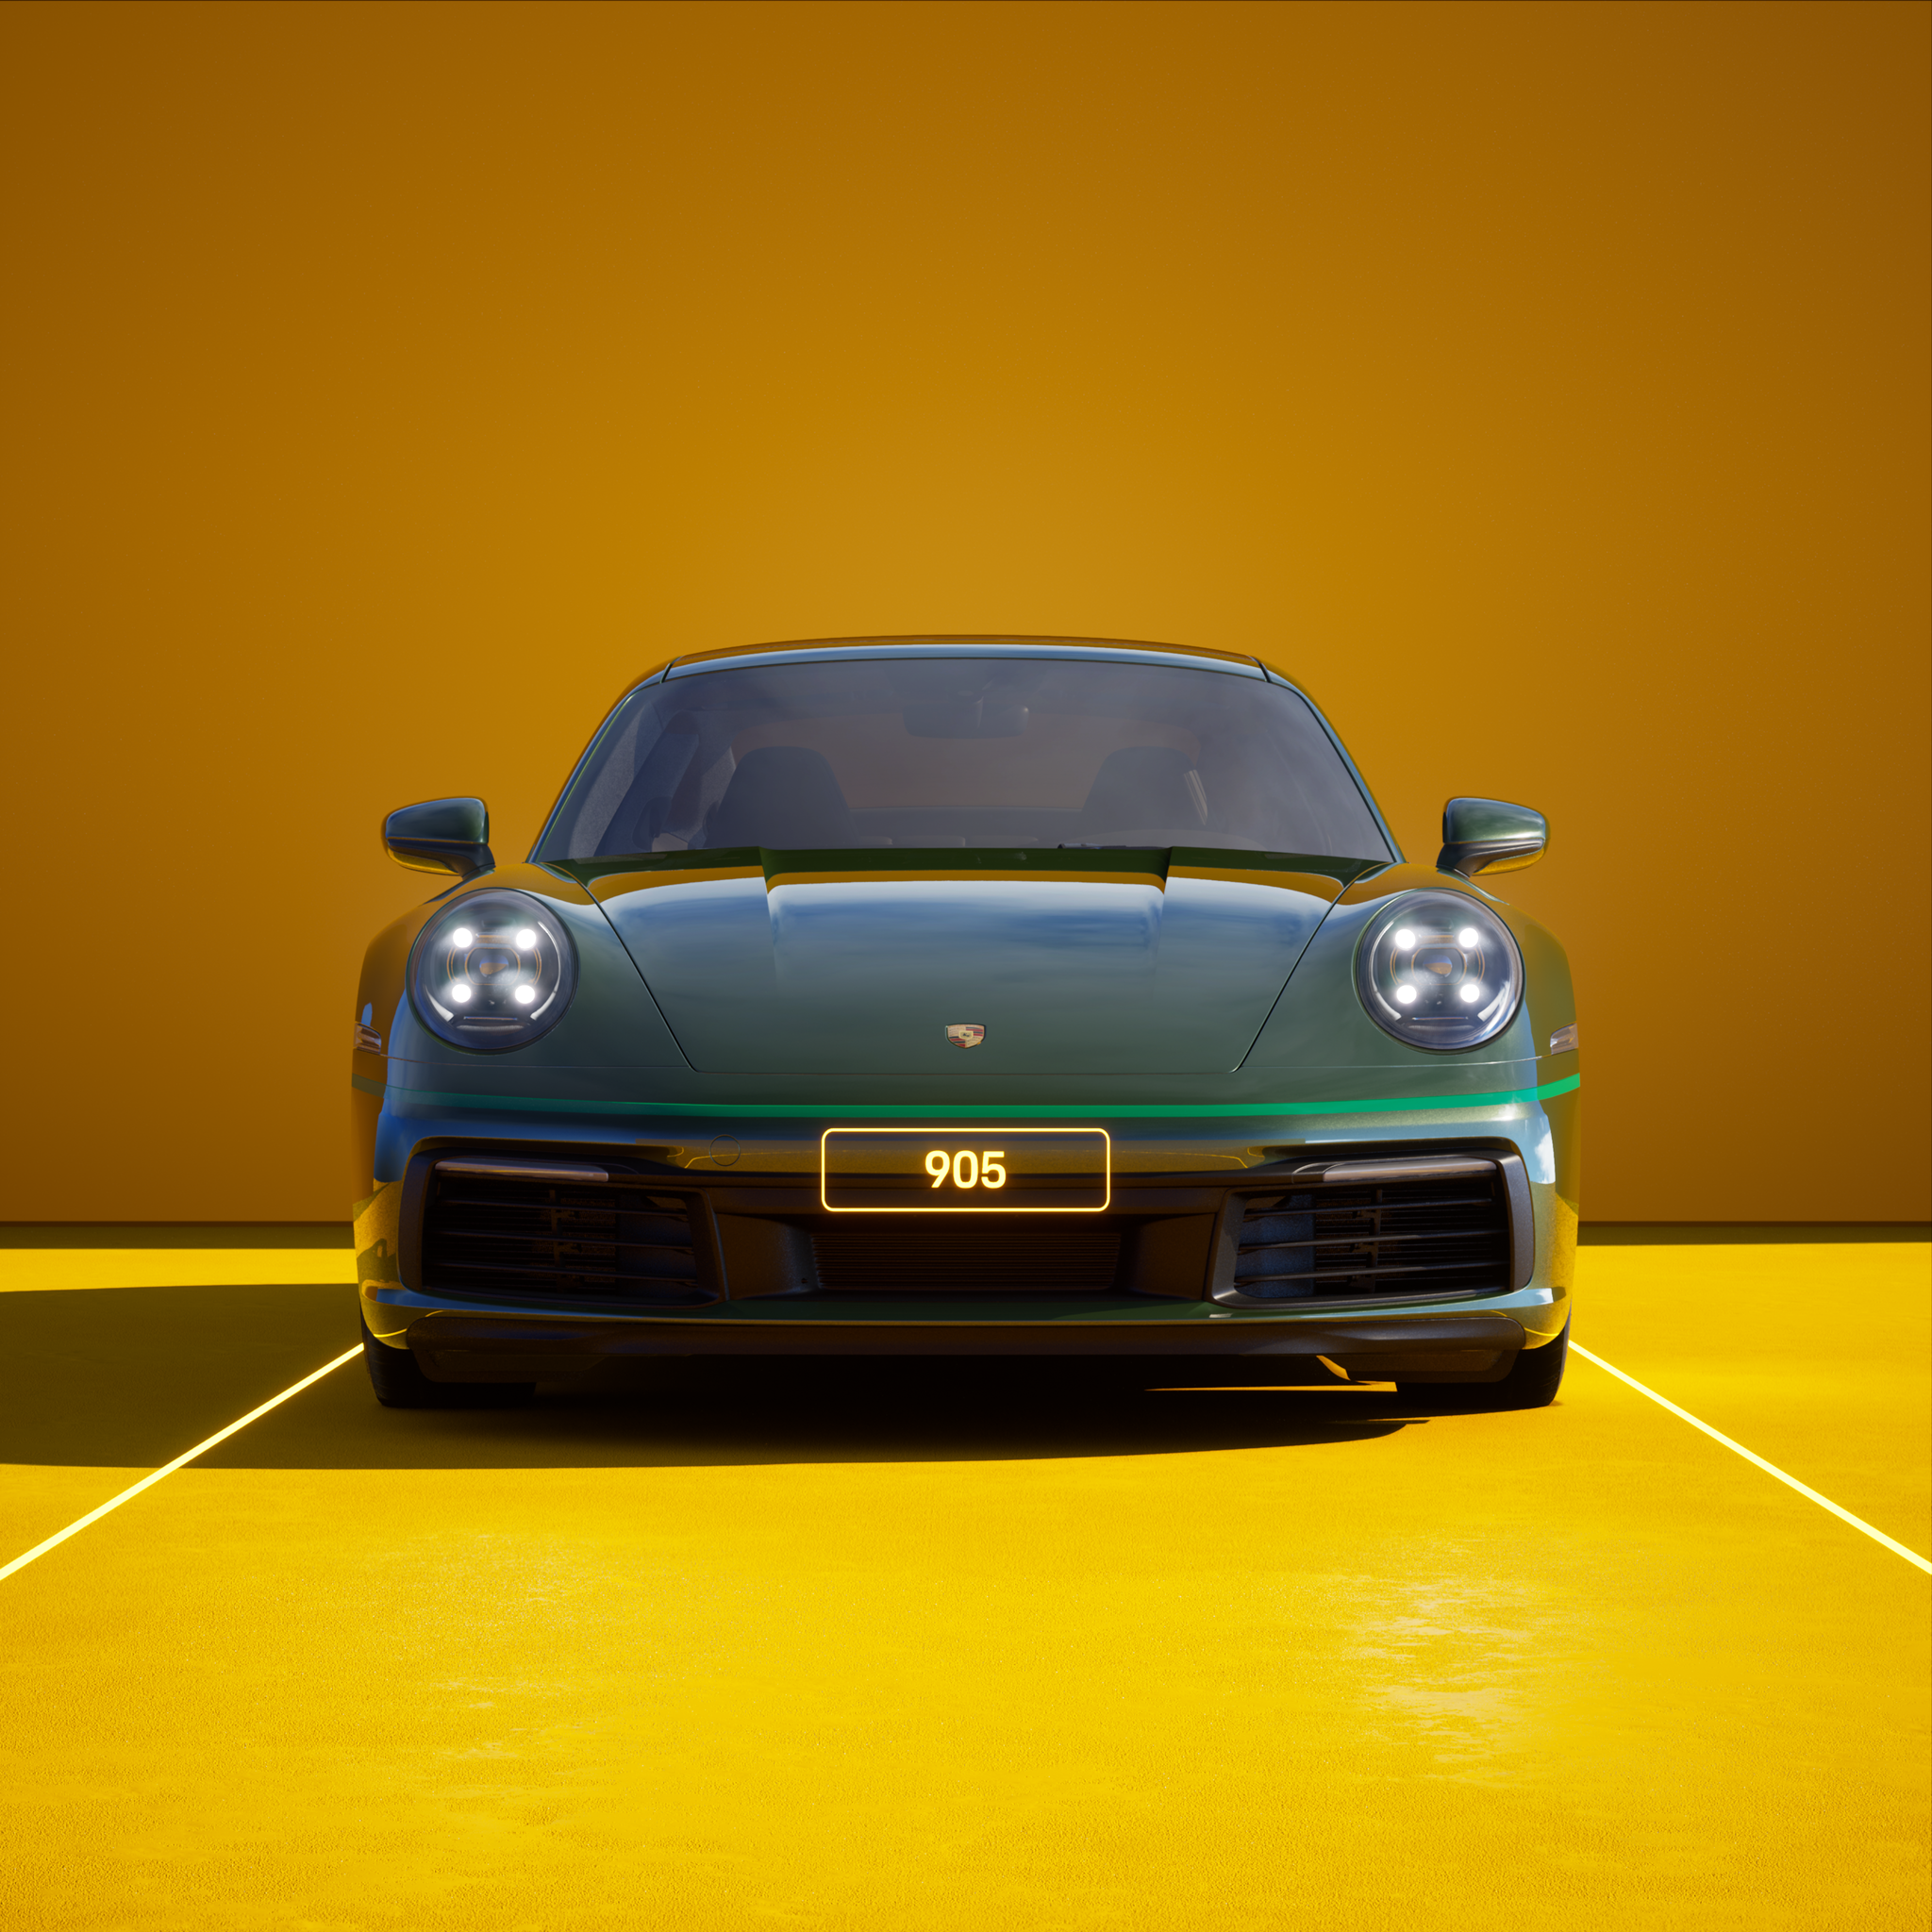 The PORSCHΞ 911 905 image in phase